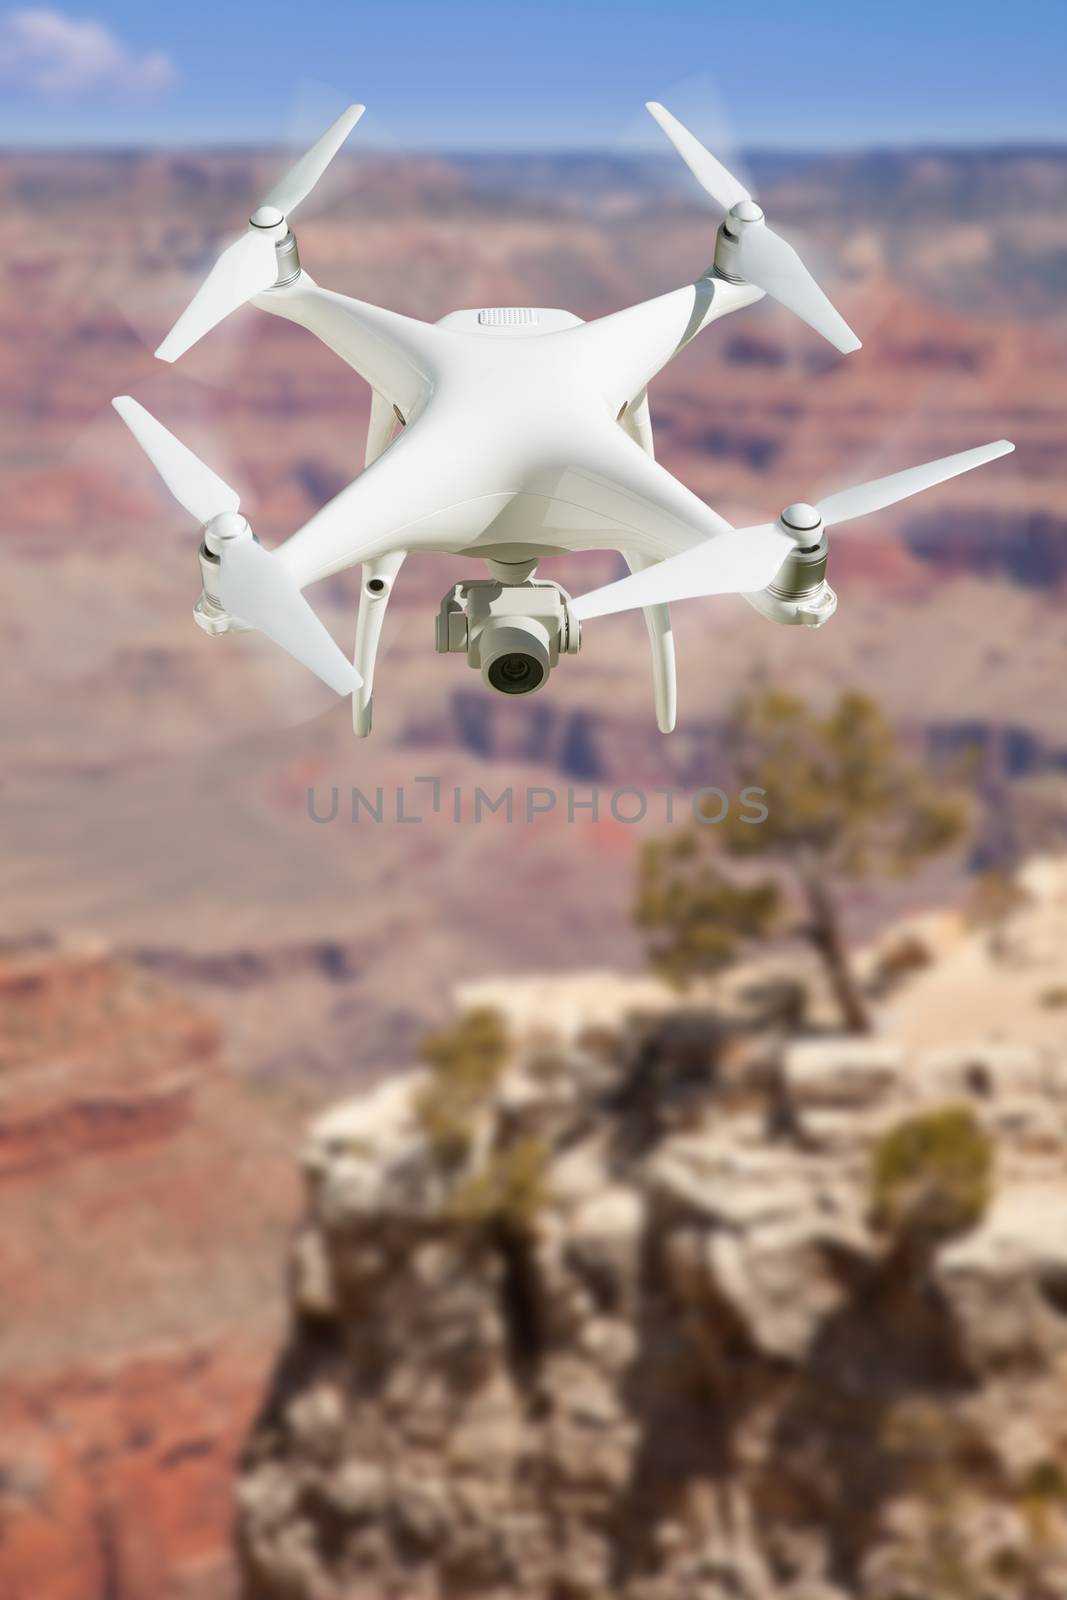 Unmanned Aircraft System (UAV) Quadcopter Drone In The Air Over The Grand Canyon.